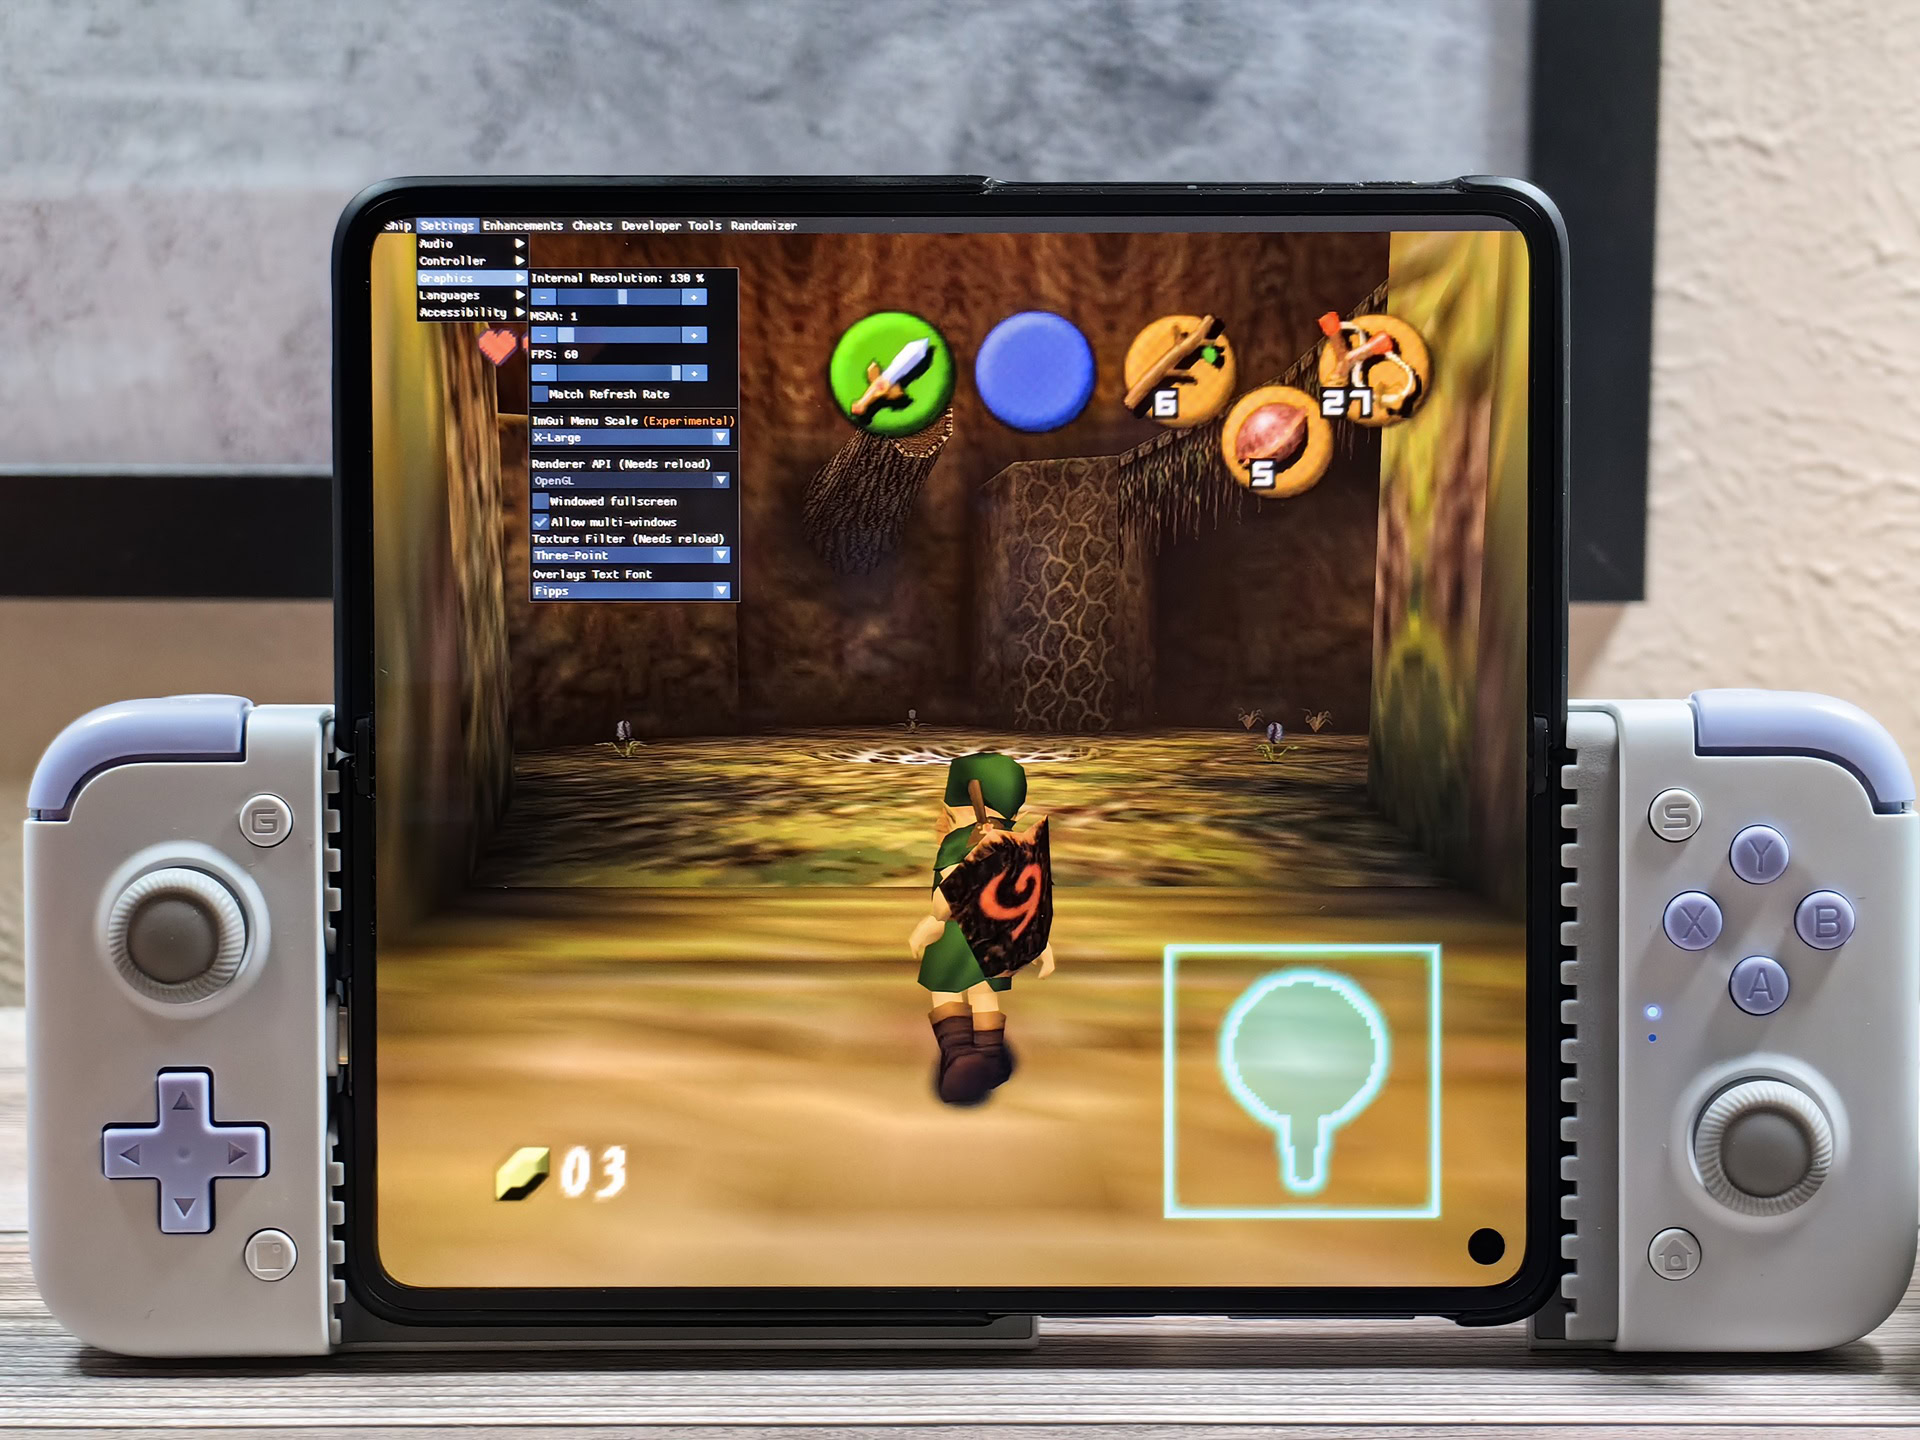 Ocarina of Time Android port graphics